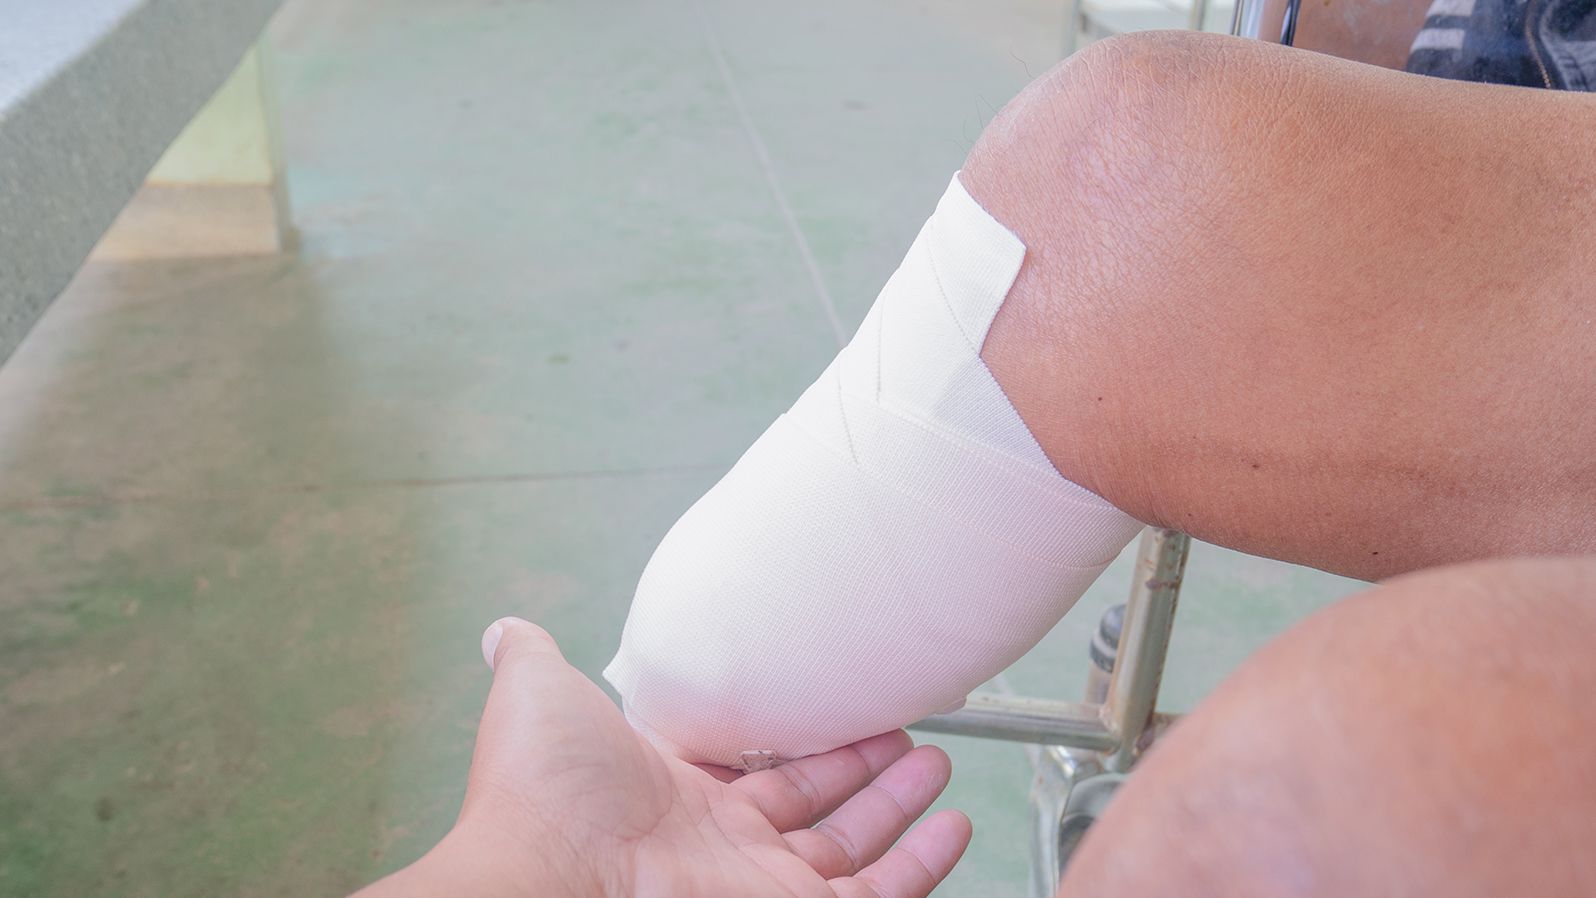 A patient with a bandaged leg following an amputation